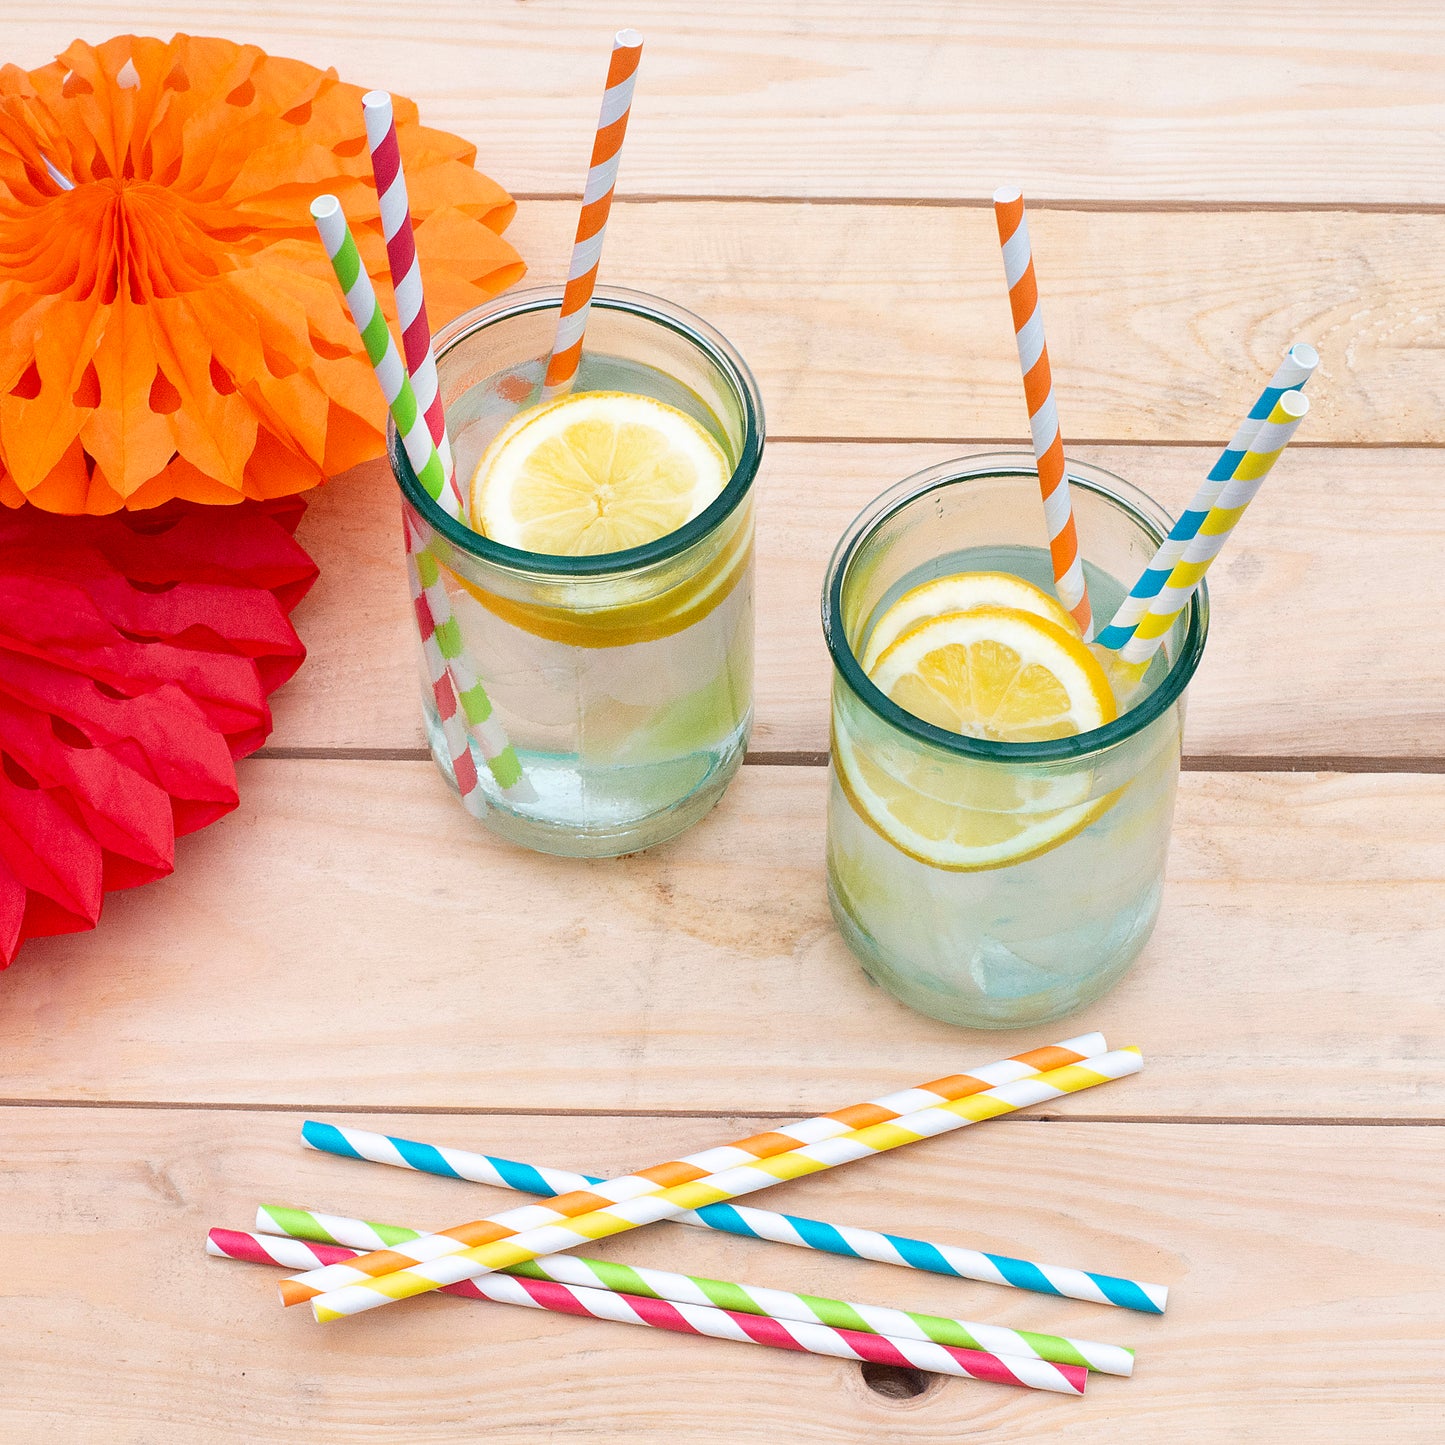 Pukka Party Striped Drinking Straws - Assorted pack of 50